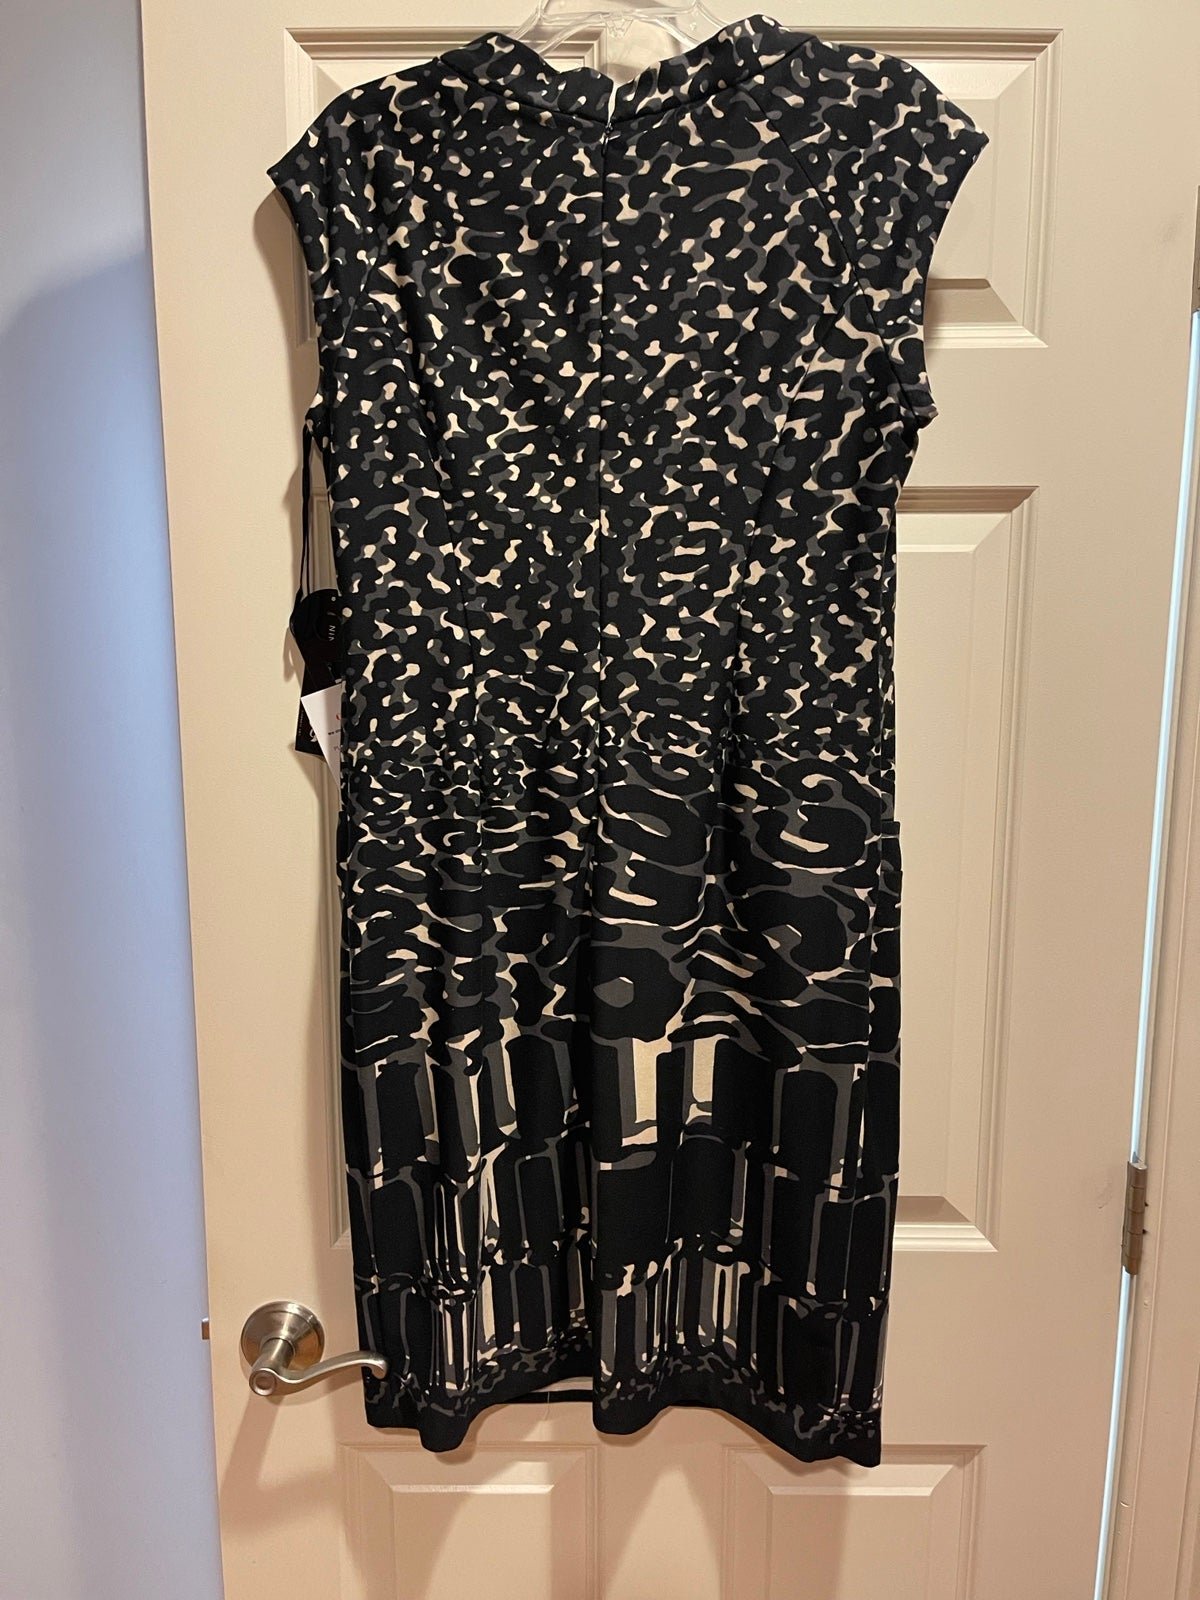 large selection NWT Sophisticated Mid-Lengths Nine West Dress, Size 14 m7SgPC1sn all for you